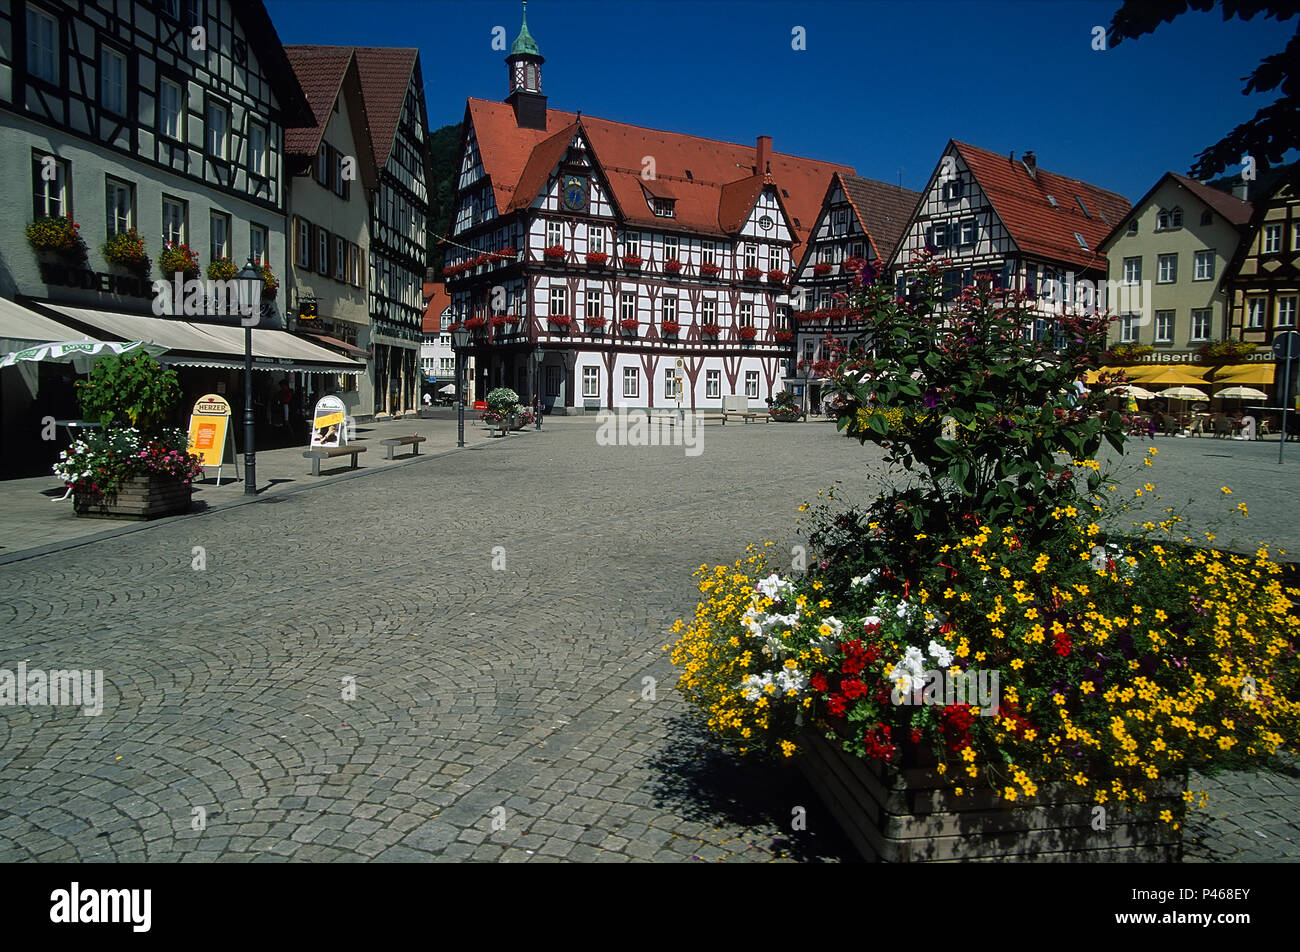 The market square and town hall of Bad Urach in Germany, in the Baden-Wurttemburg area Stock Photo